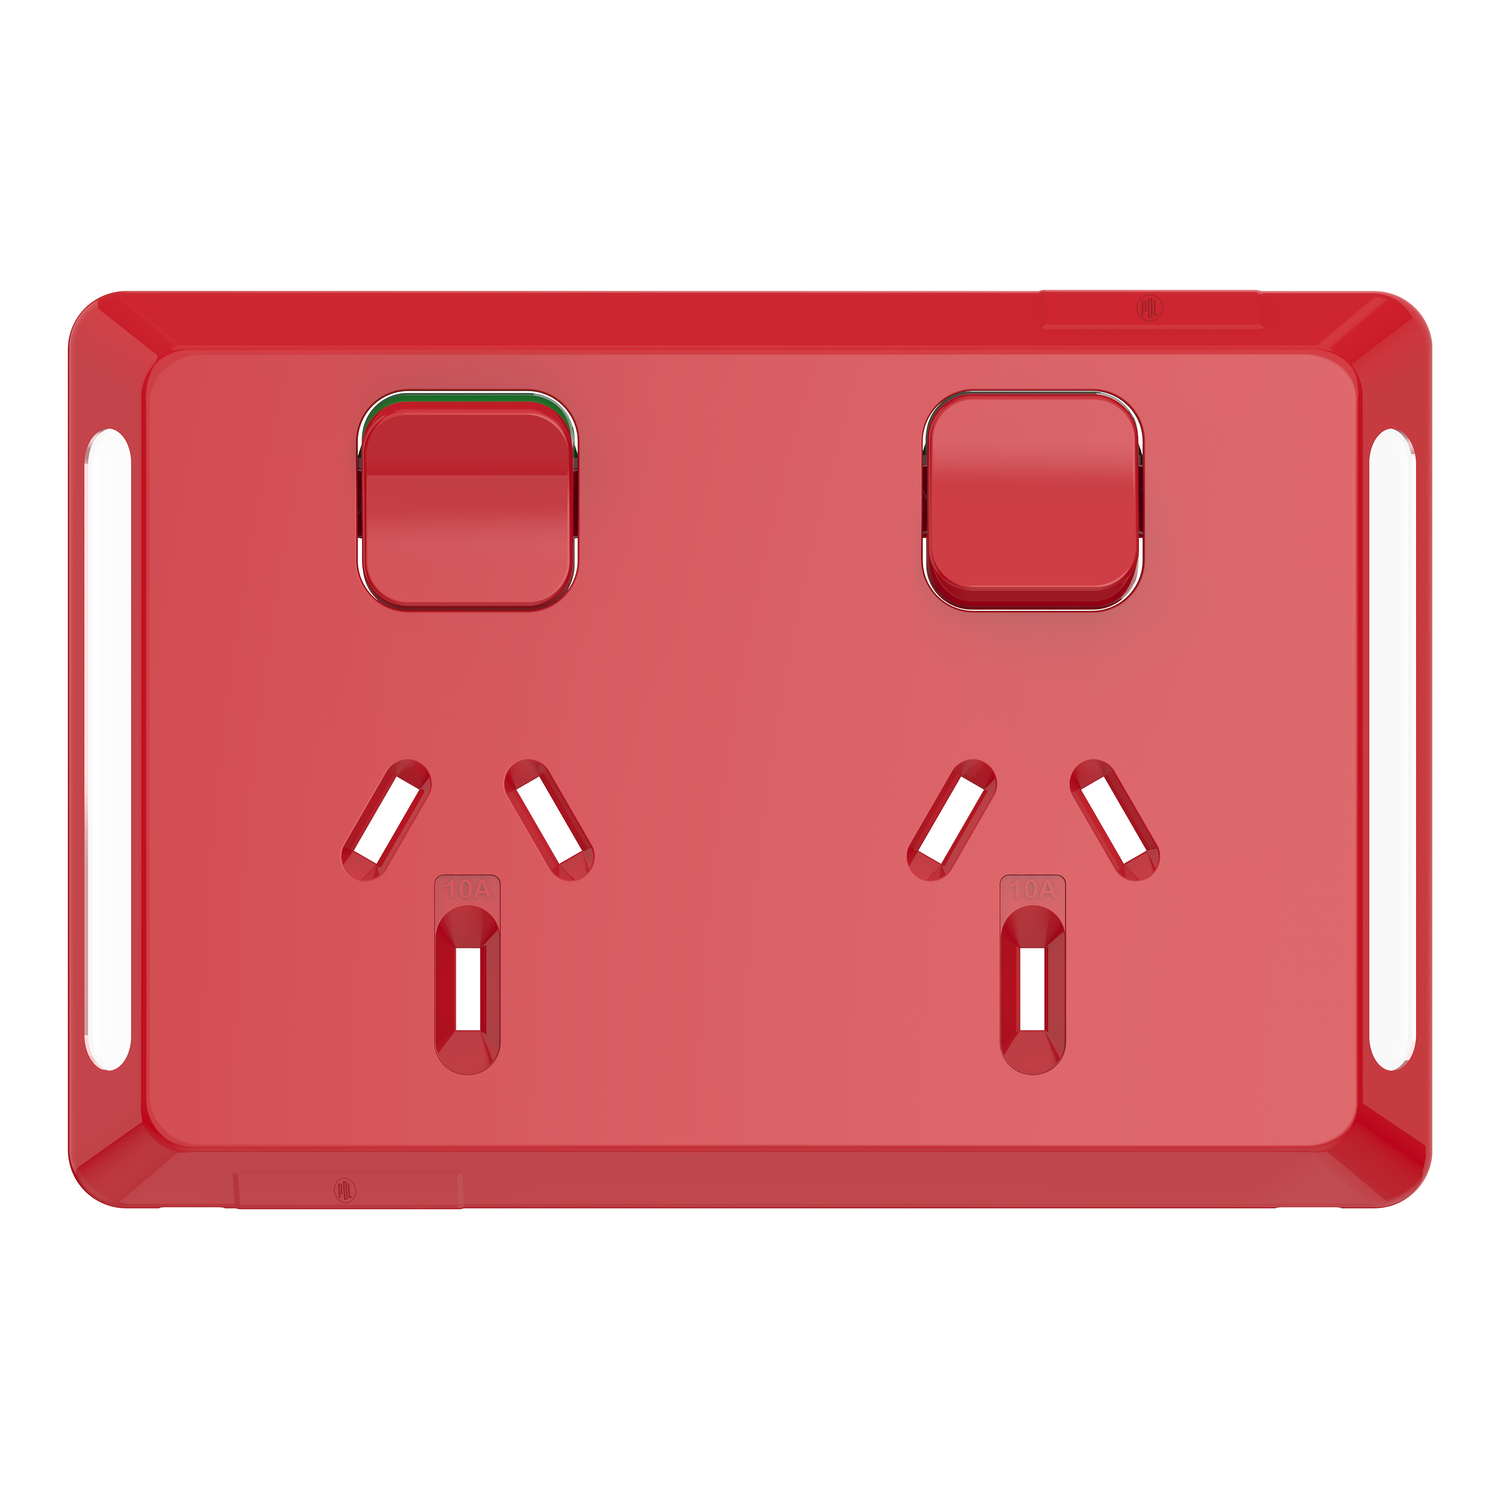 PDL Pro Series - Cover Plate Double Swiched Socket 10A Horizontal - Red